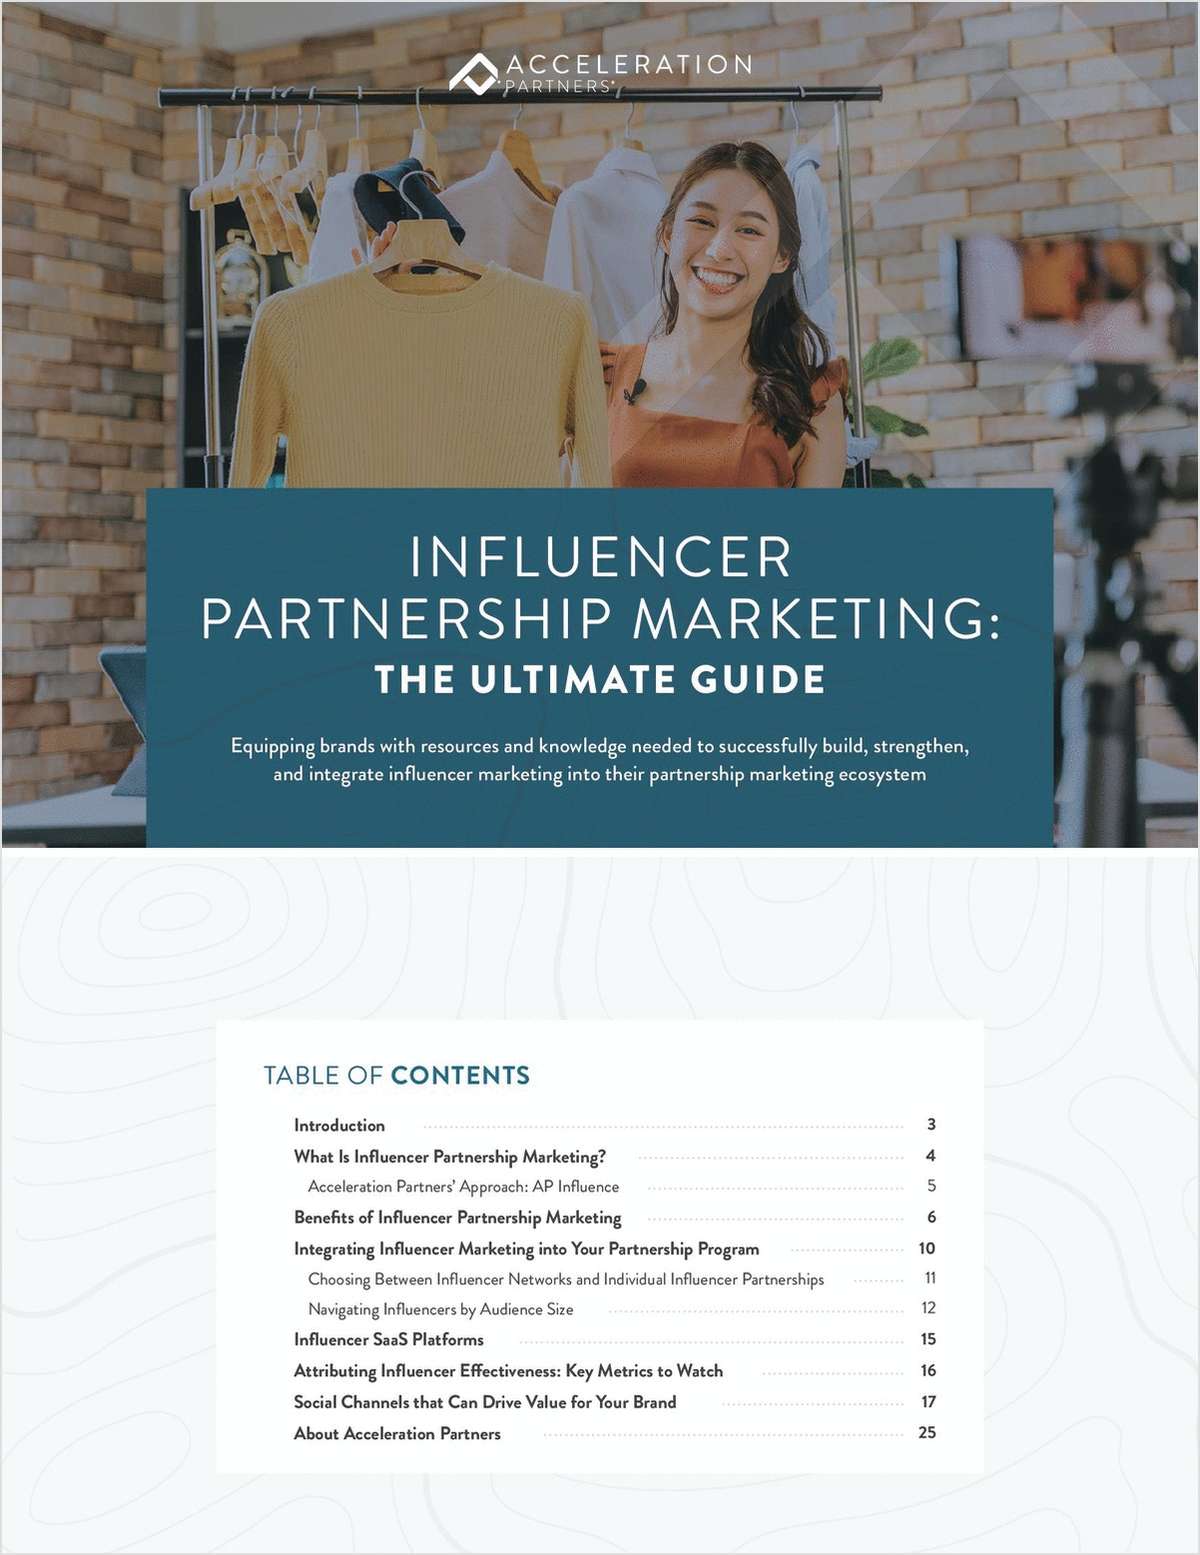 Influencer Partnership Marketing: The Ultimate Guide